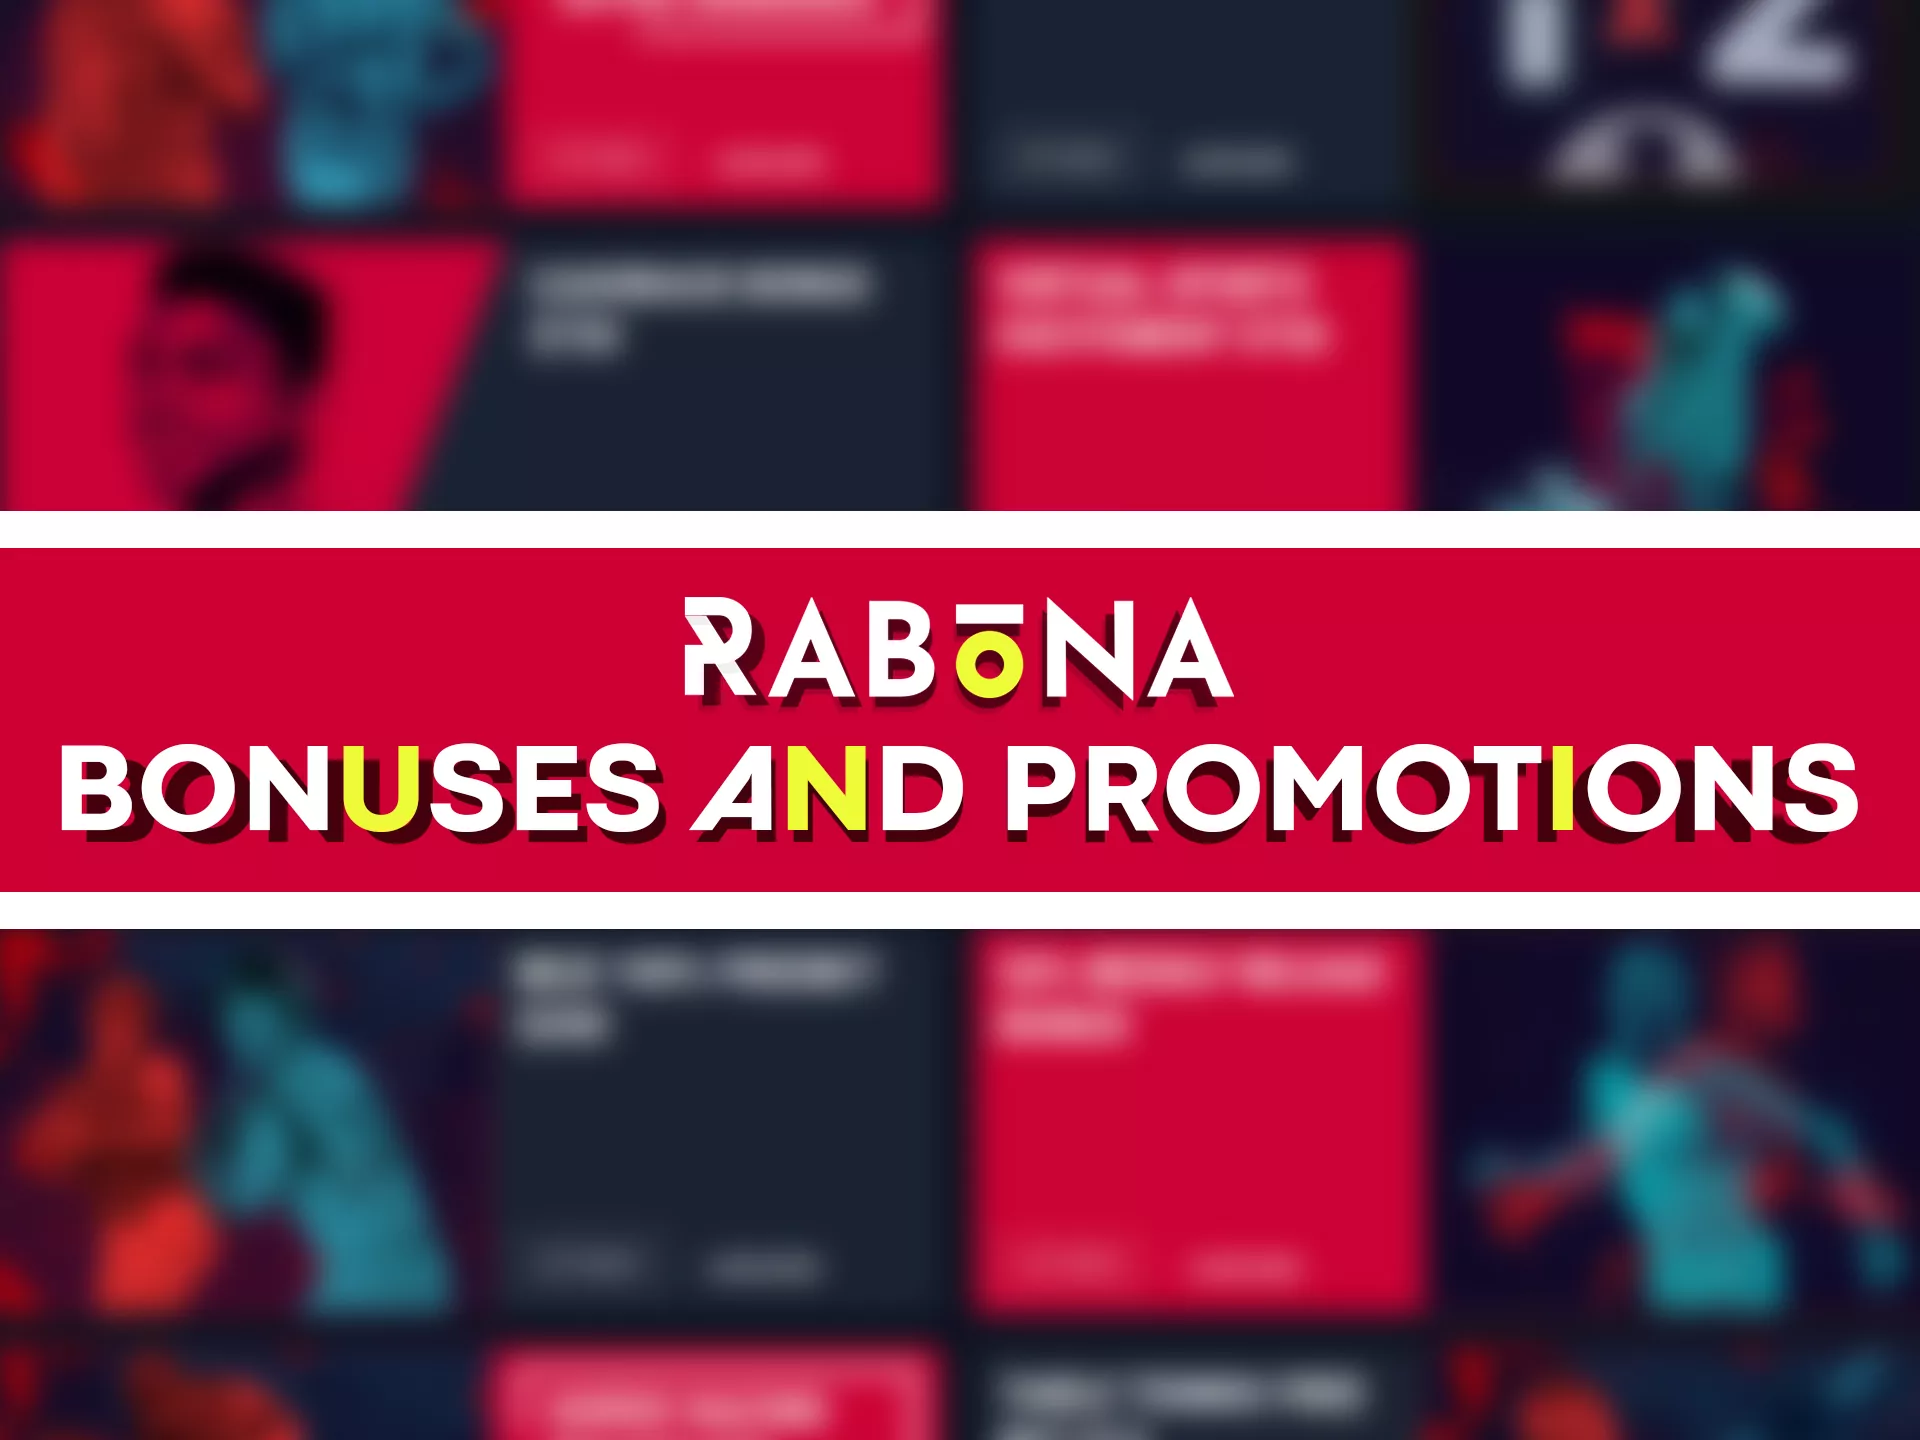 Rabona has different bonuses and promotions.